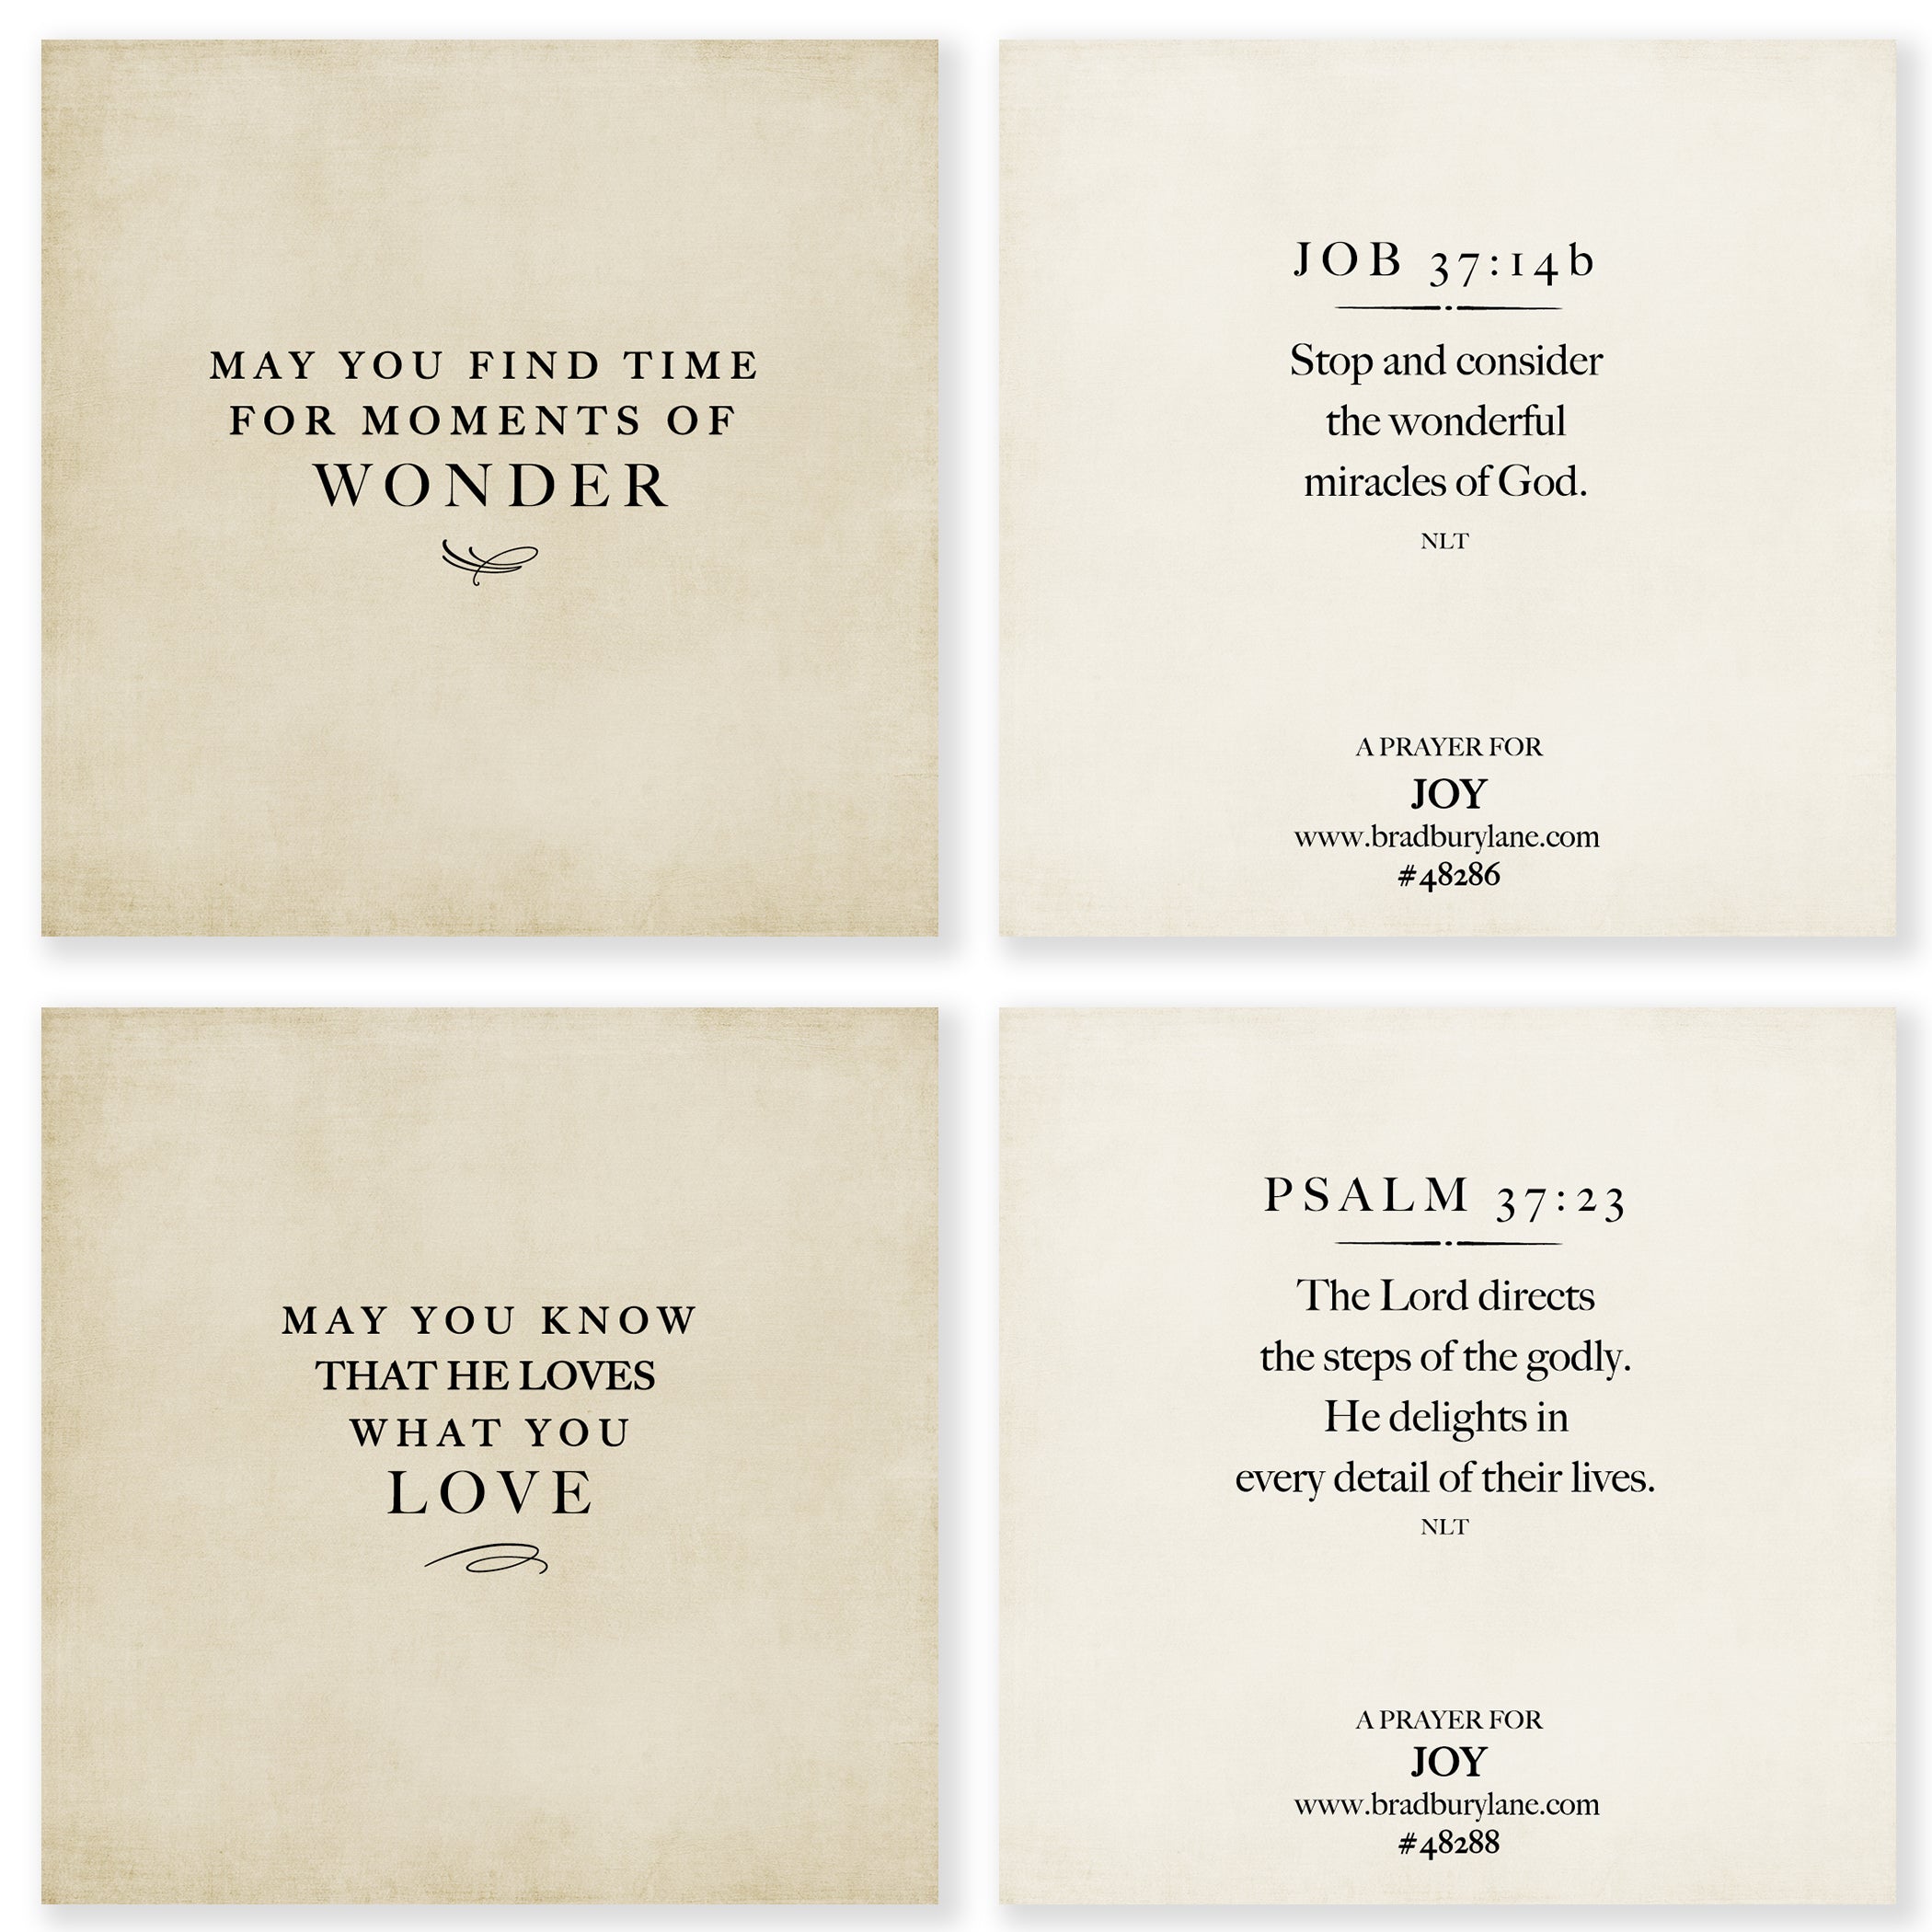 31 Days of Prayers for You Boxed Mini Print Collection (Version 2) w/Acrylic Holder